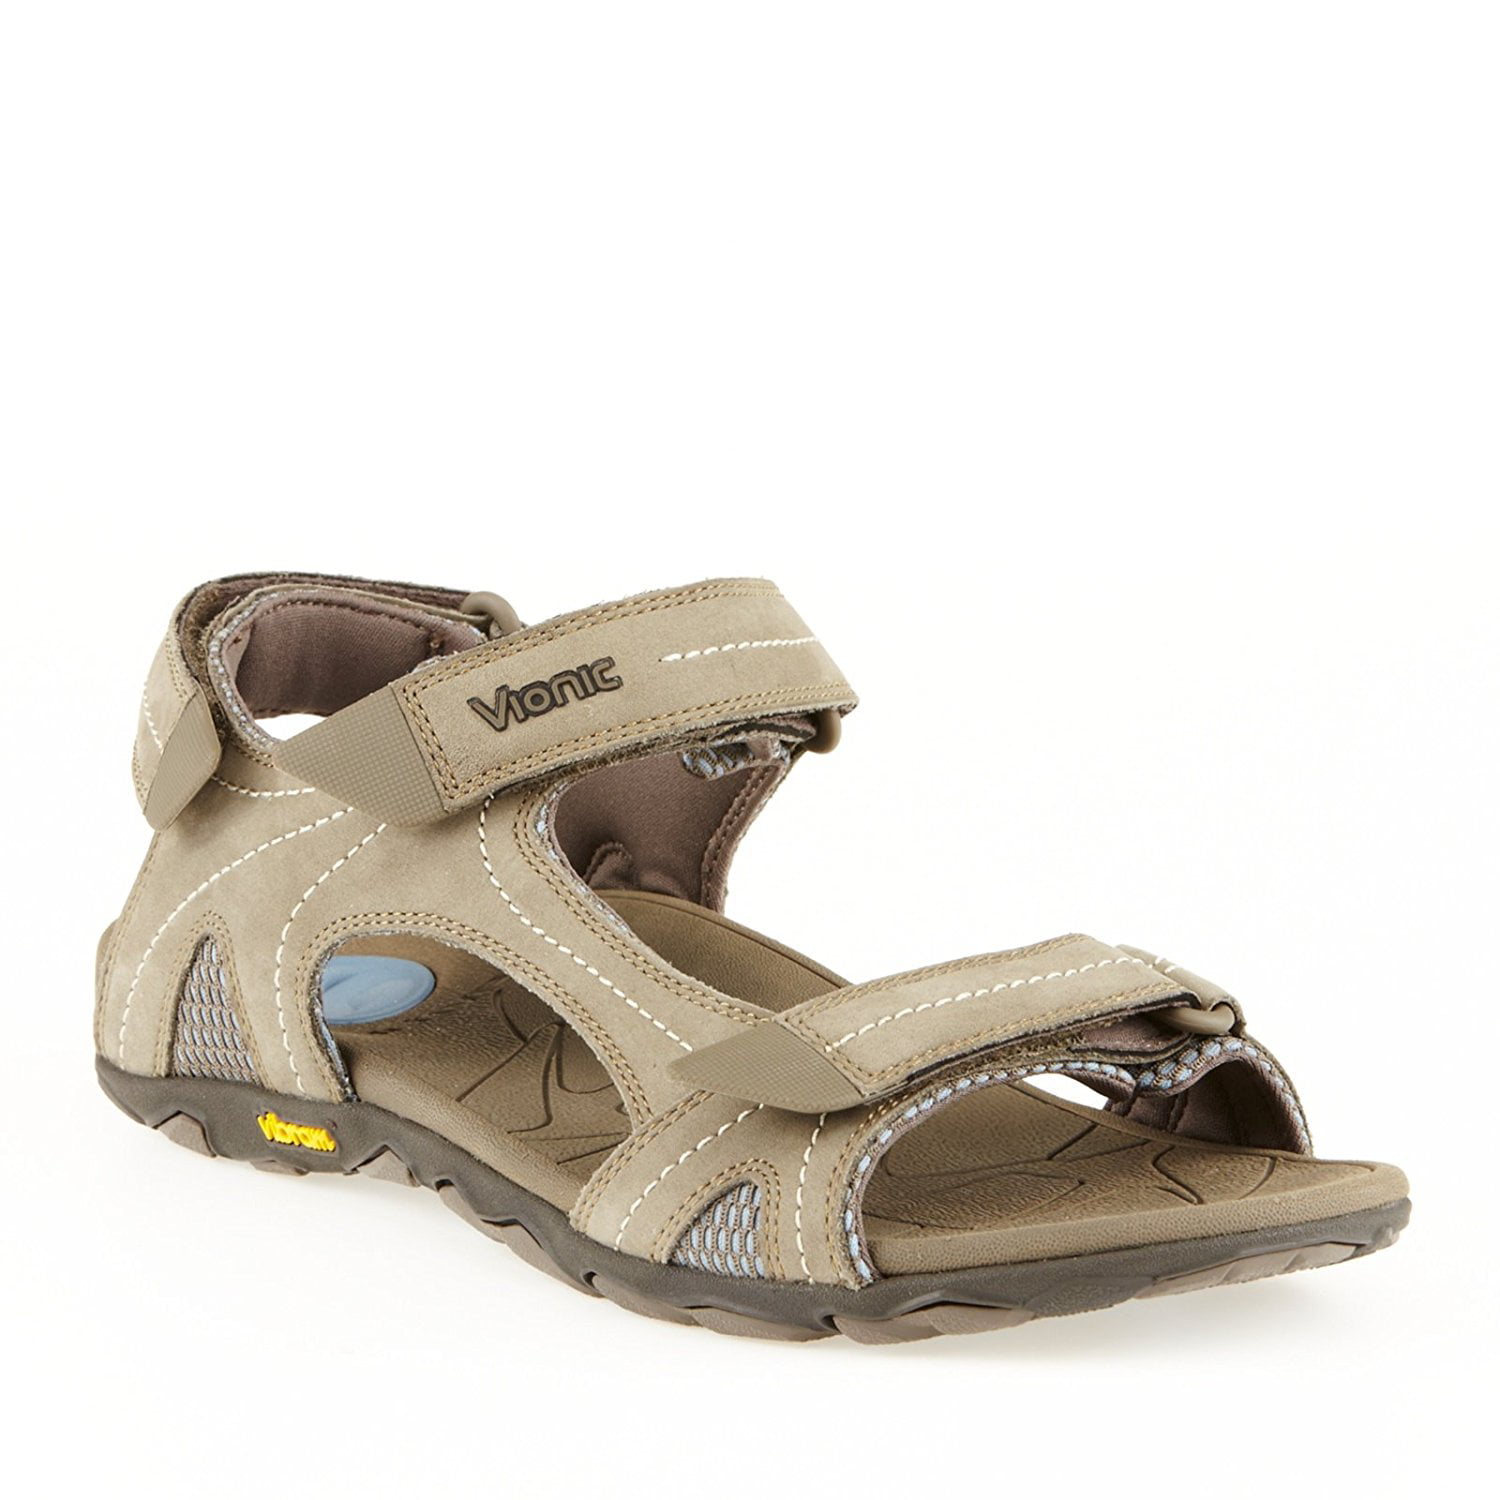 Vionic with Orthaheel Technology Men's Ryder Thong Sandals - Walmart.com